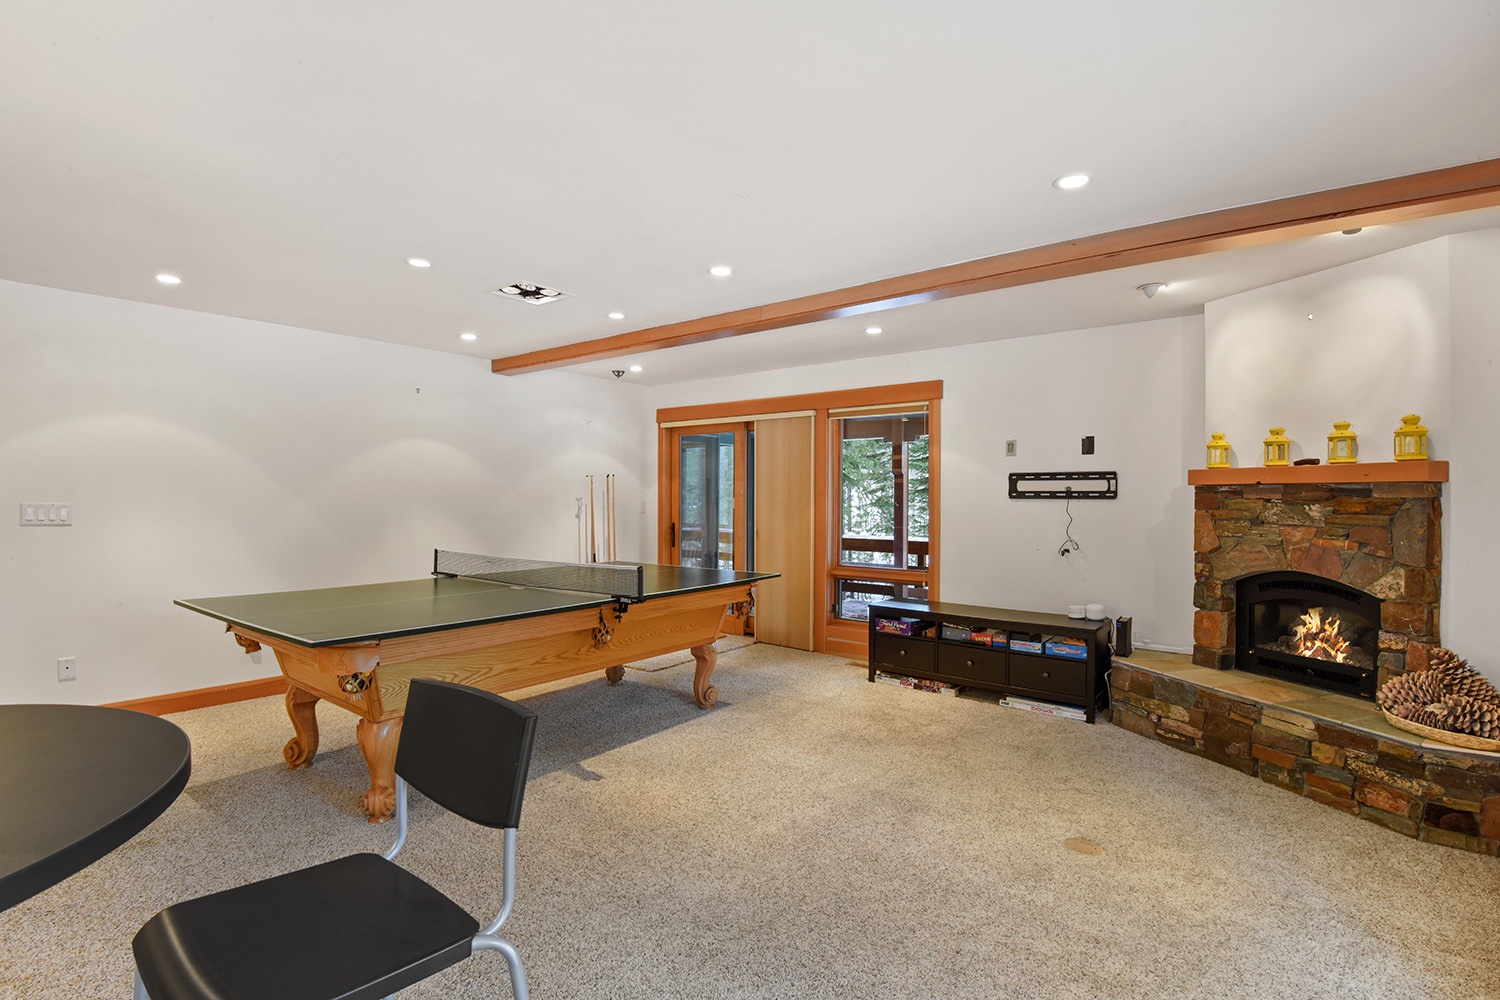 Game room with pool table, games, and fireplace (downstairs)